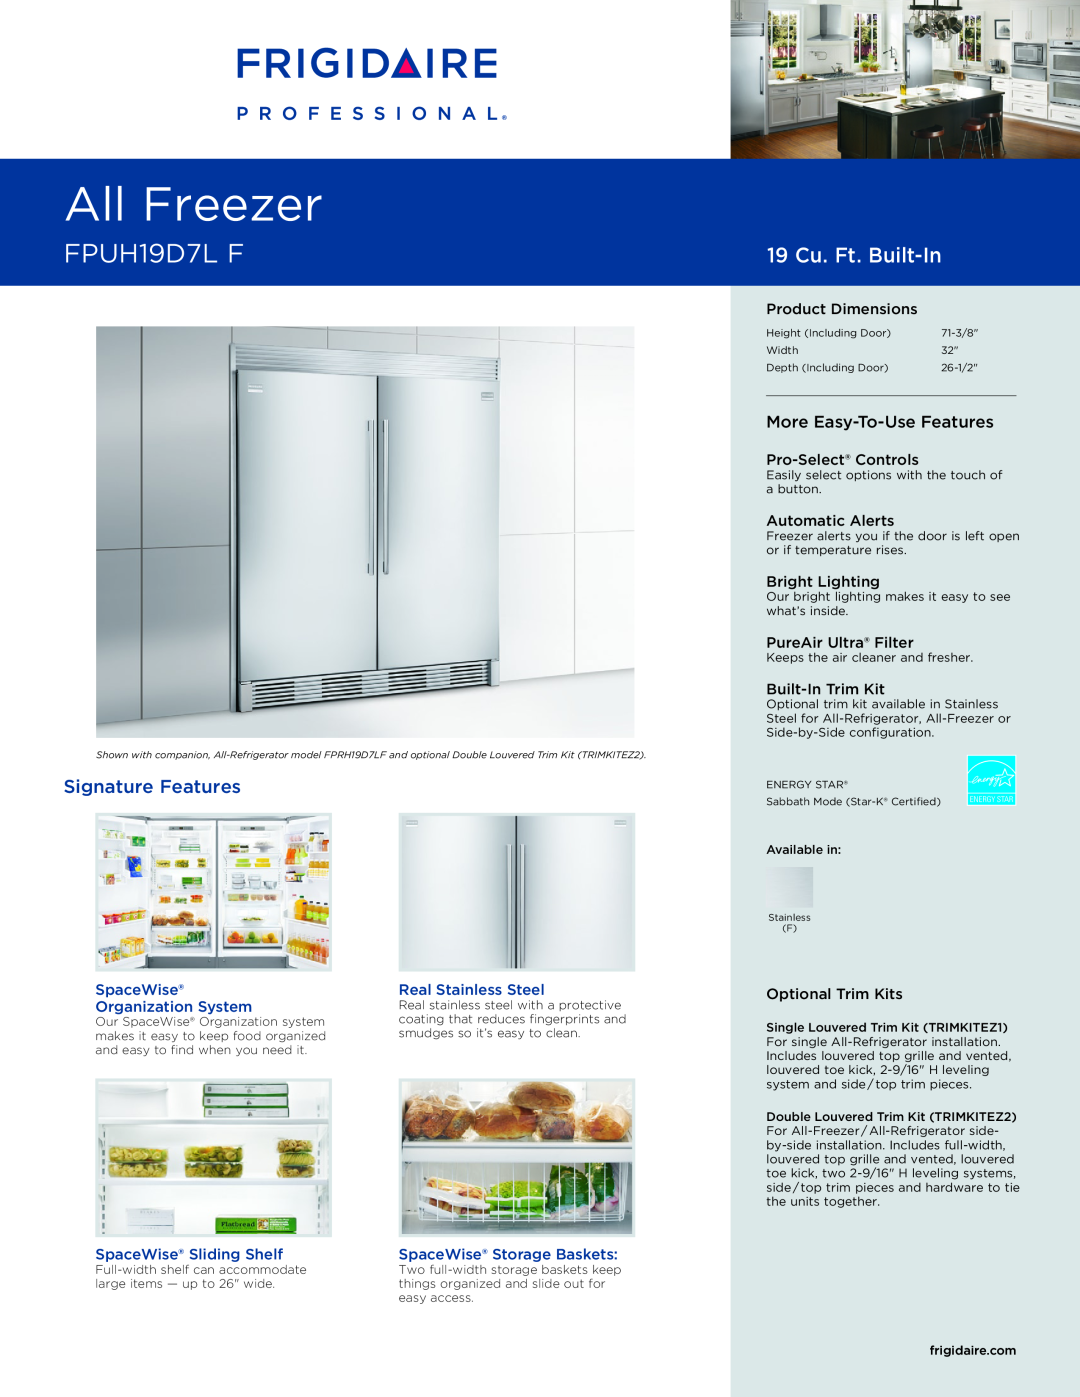 Frigidaire FPUH19D7L F dimensions Real Stainless Steel, Organization System, SpaceWise Sliding Shelf, All Freezer 